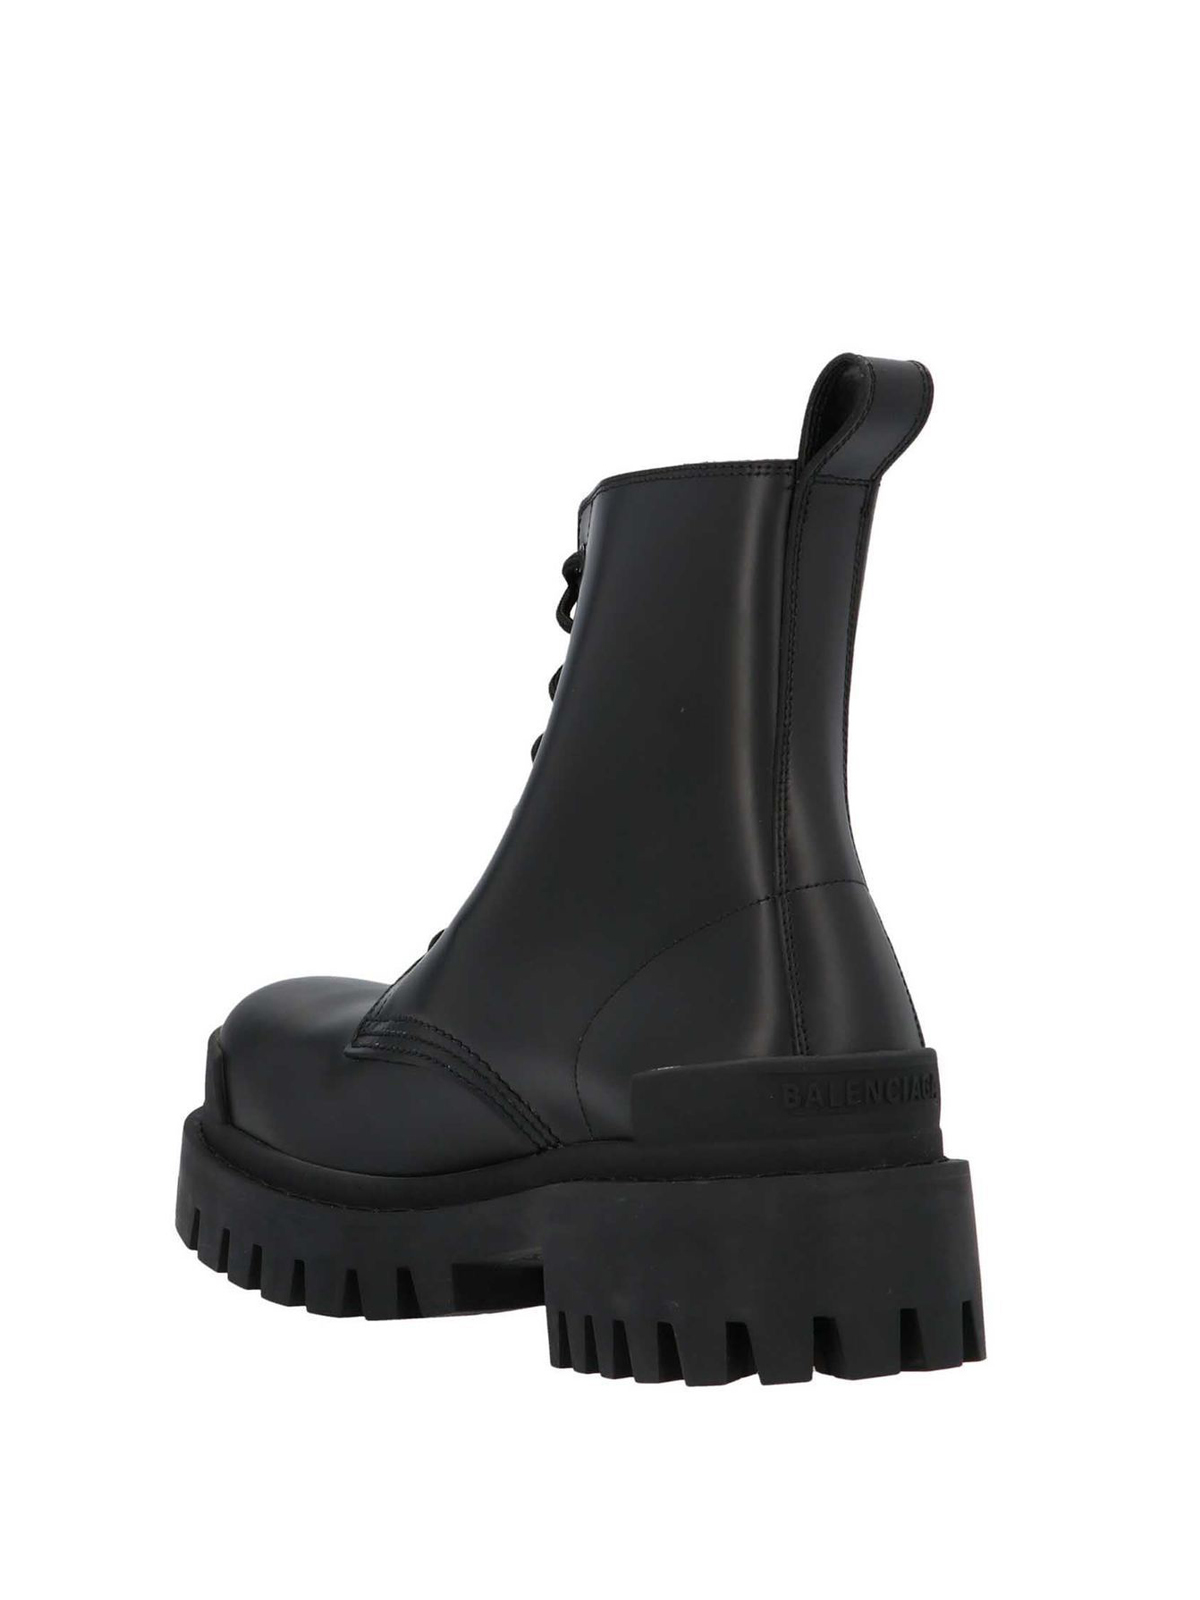 Balenciaga - Strike ankle boots in black - ankle boots - 590974WA9601000